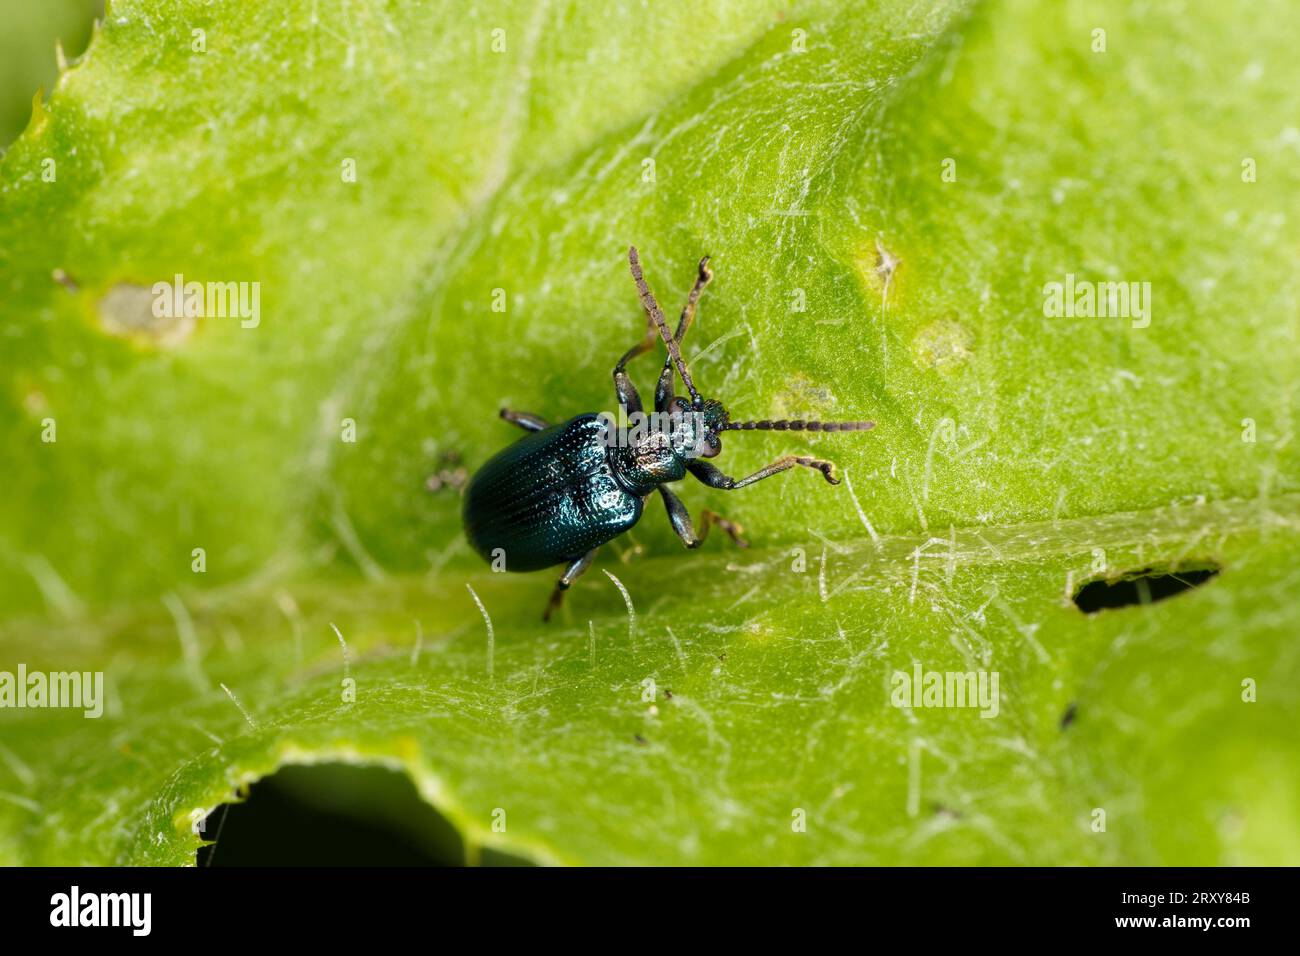 Lema cyanella Family Chrysomelidae Genus Lema Californian thistle leaf beatle wild nature insect photography, picture, wallpaper Stock Photo